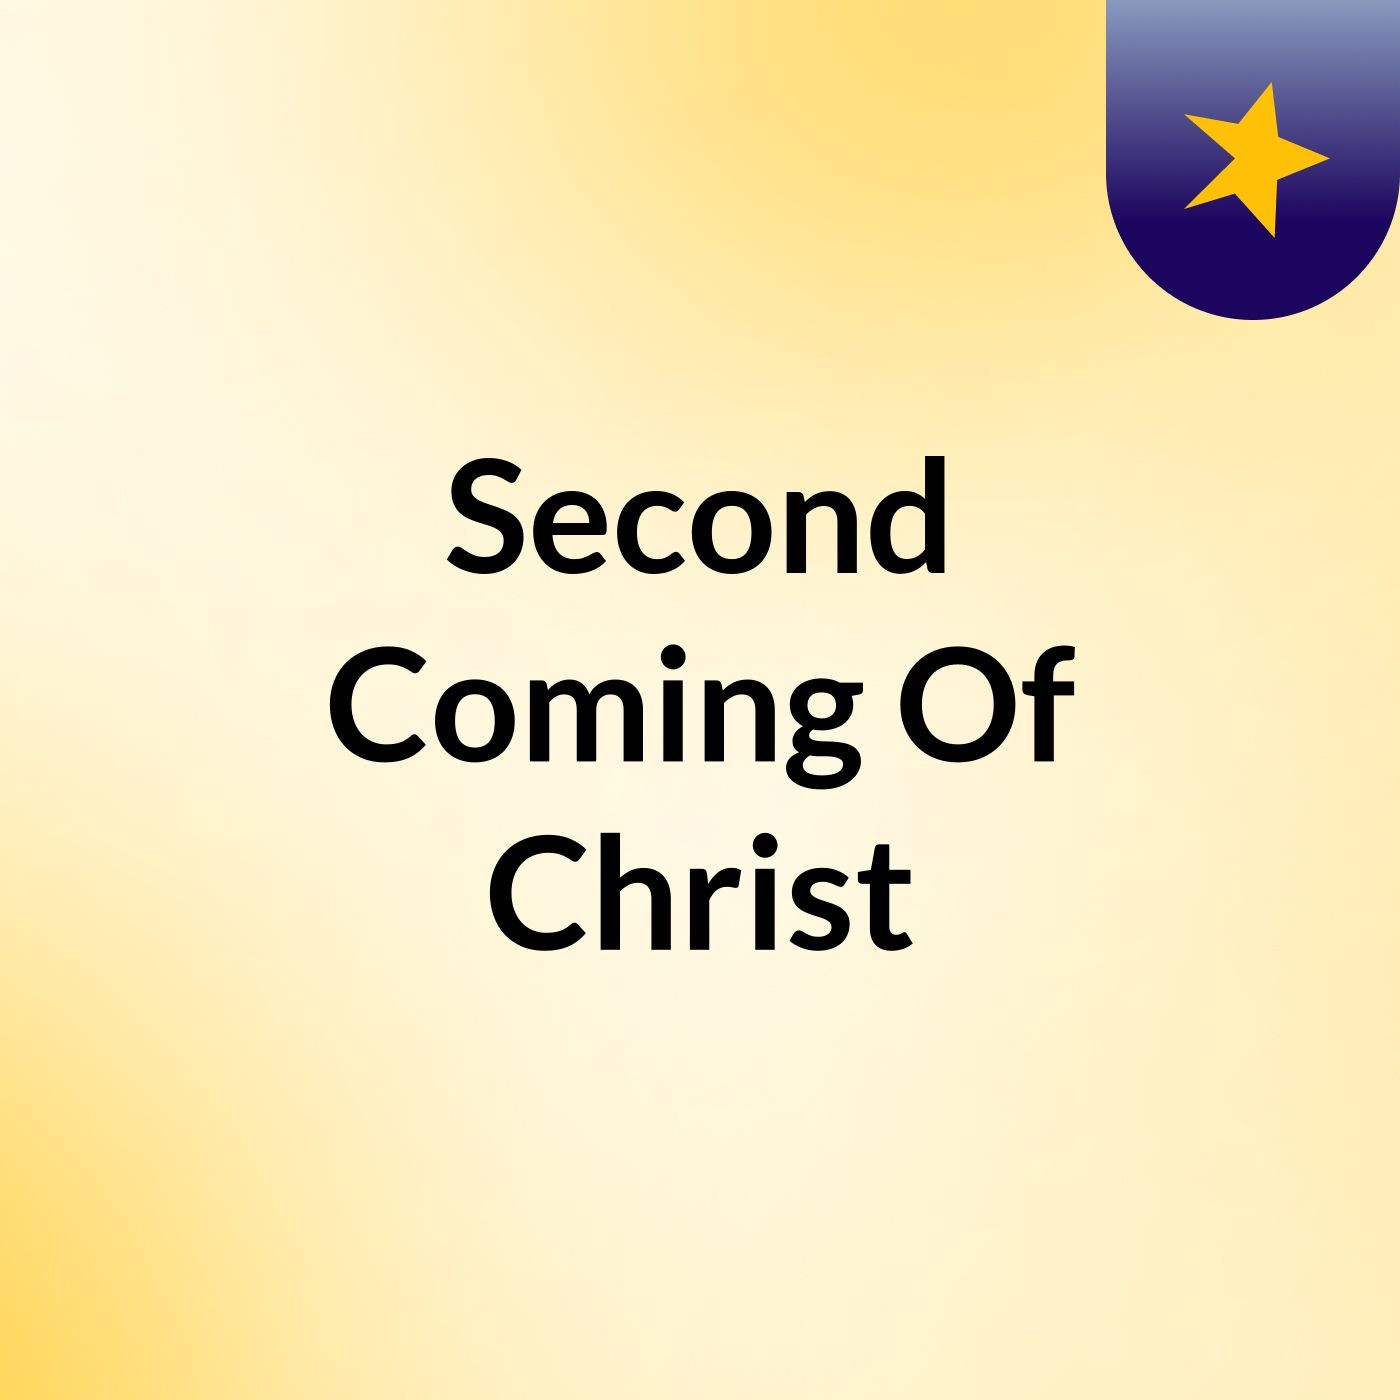 Second Coming Of Christ